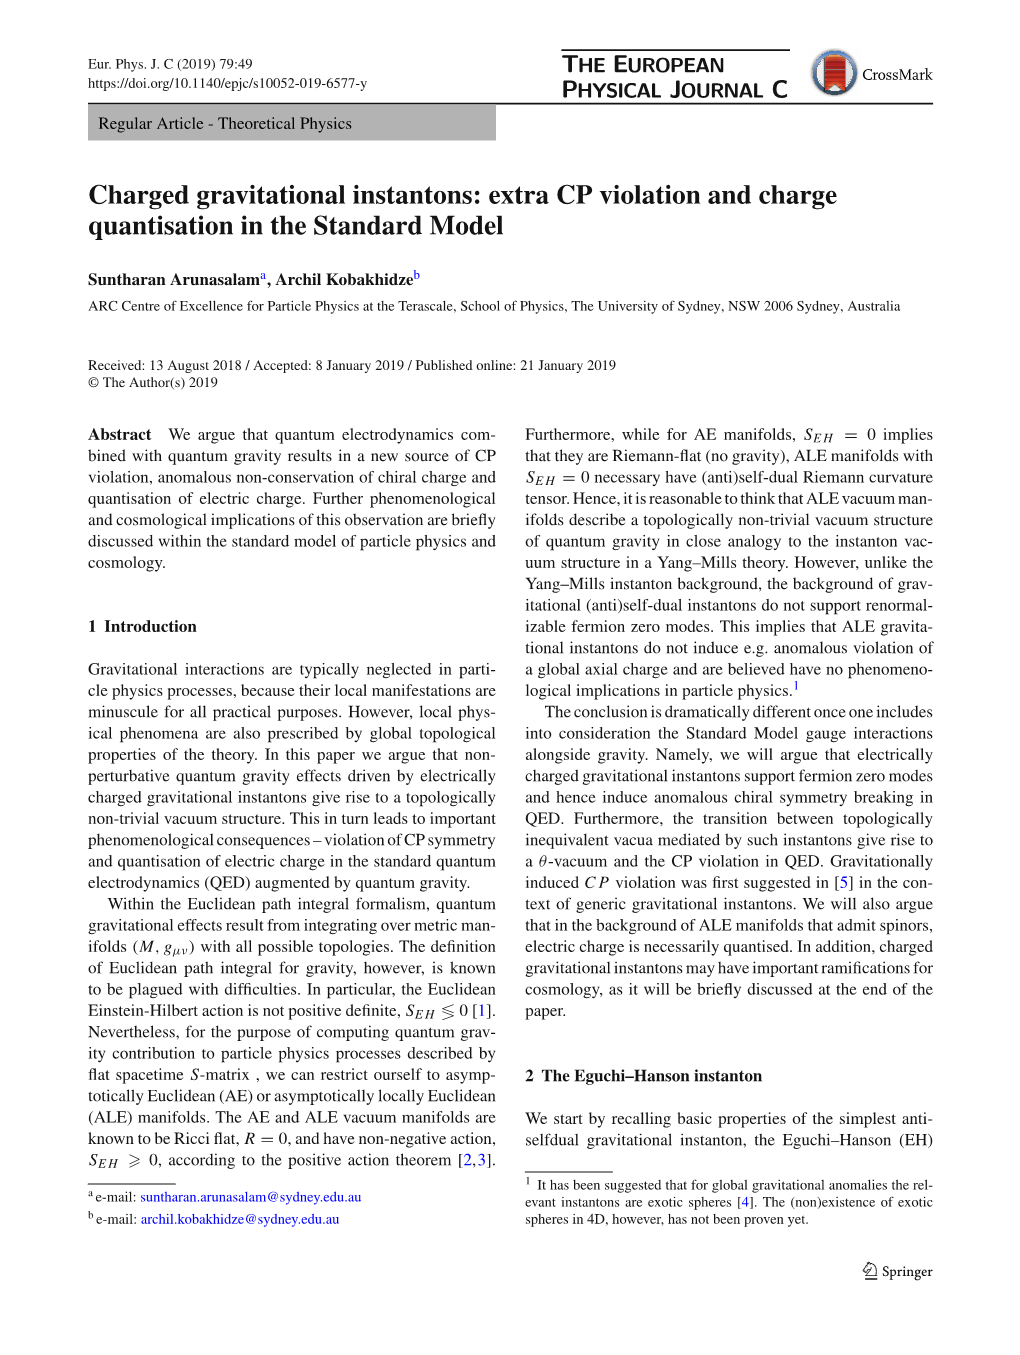 Extra CP Violation and Charge Quantisation in the Standard Model